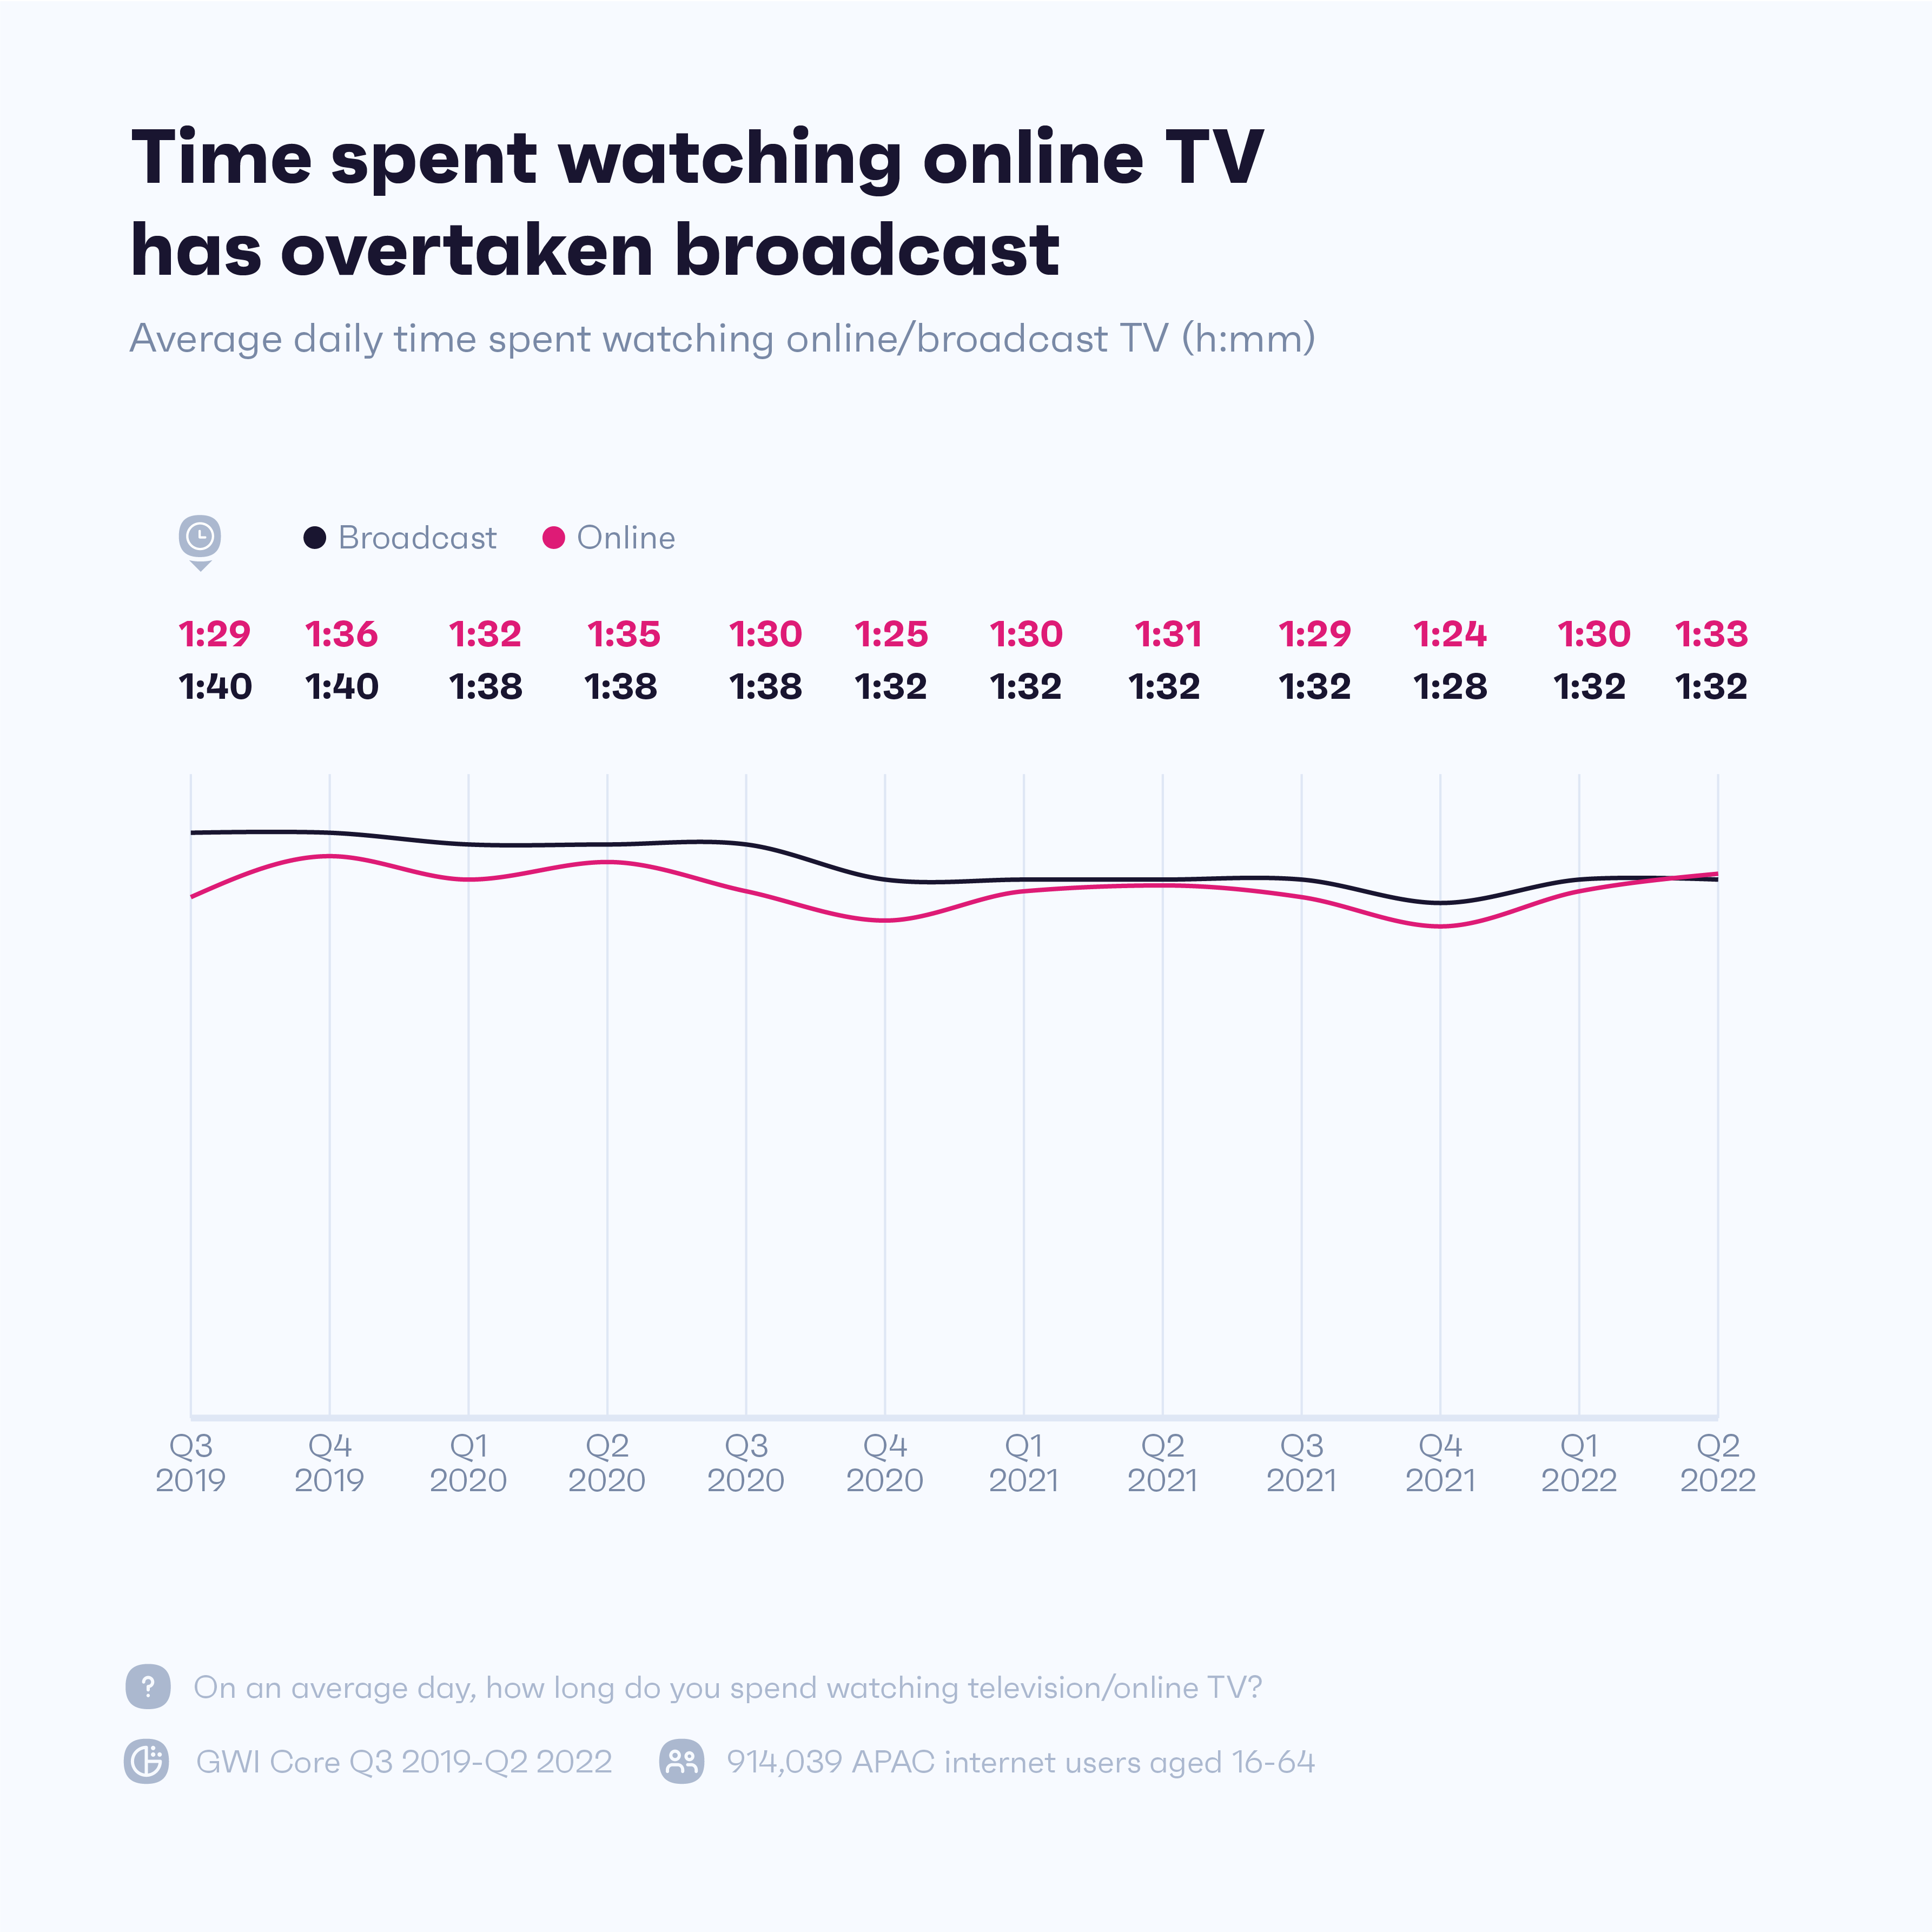 Chart showing differences in watch time for online TV and broadcast TV